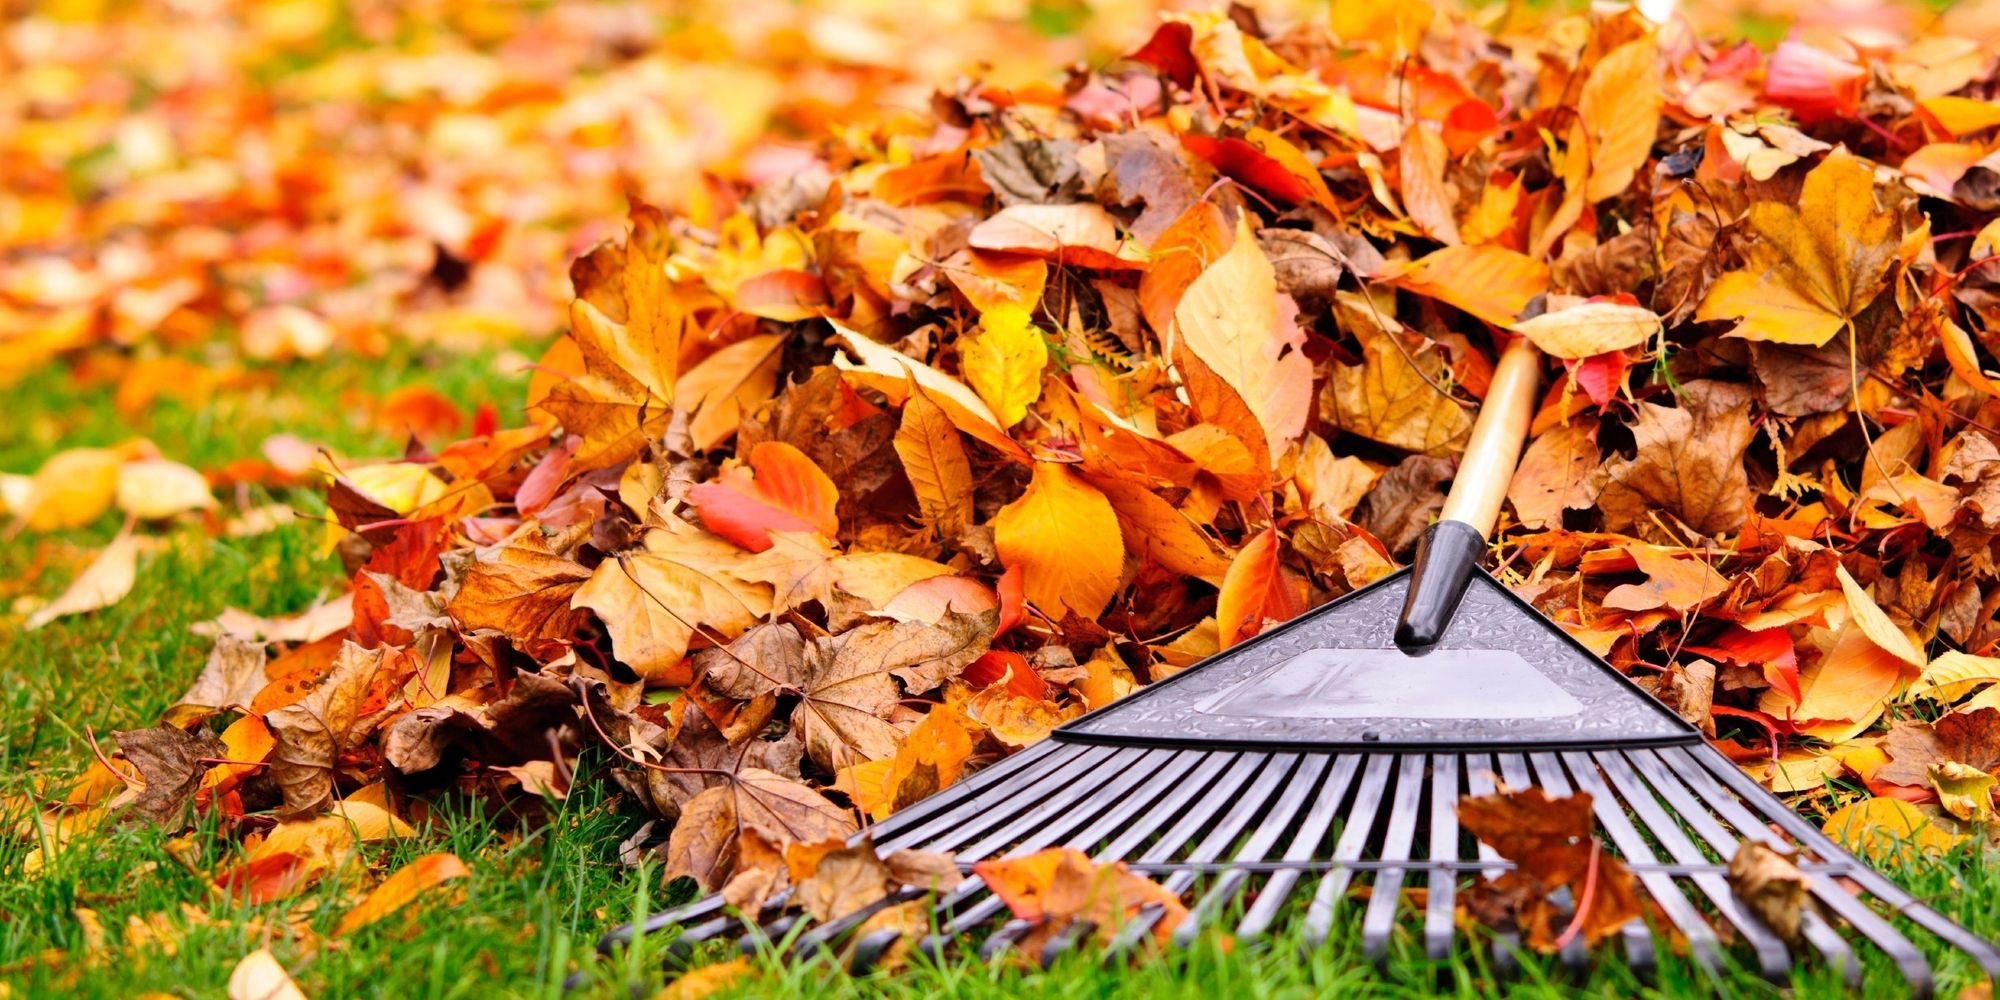 Fall Clean-Up Church Grounds (Cancelled)